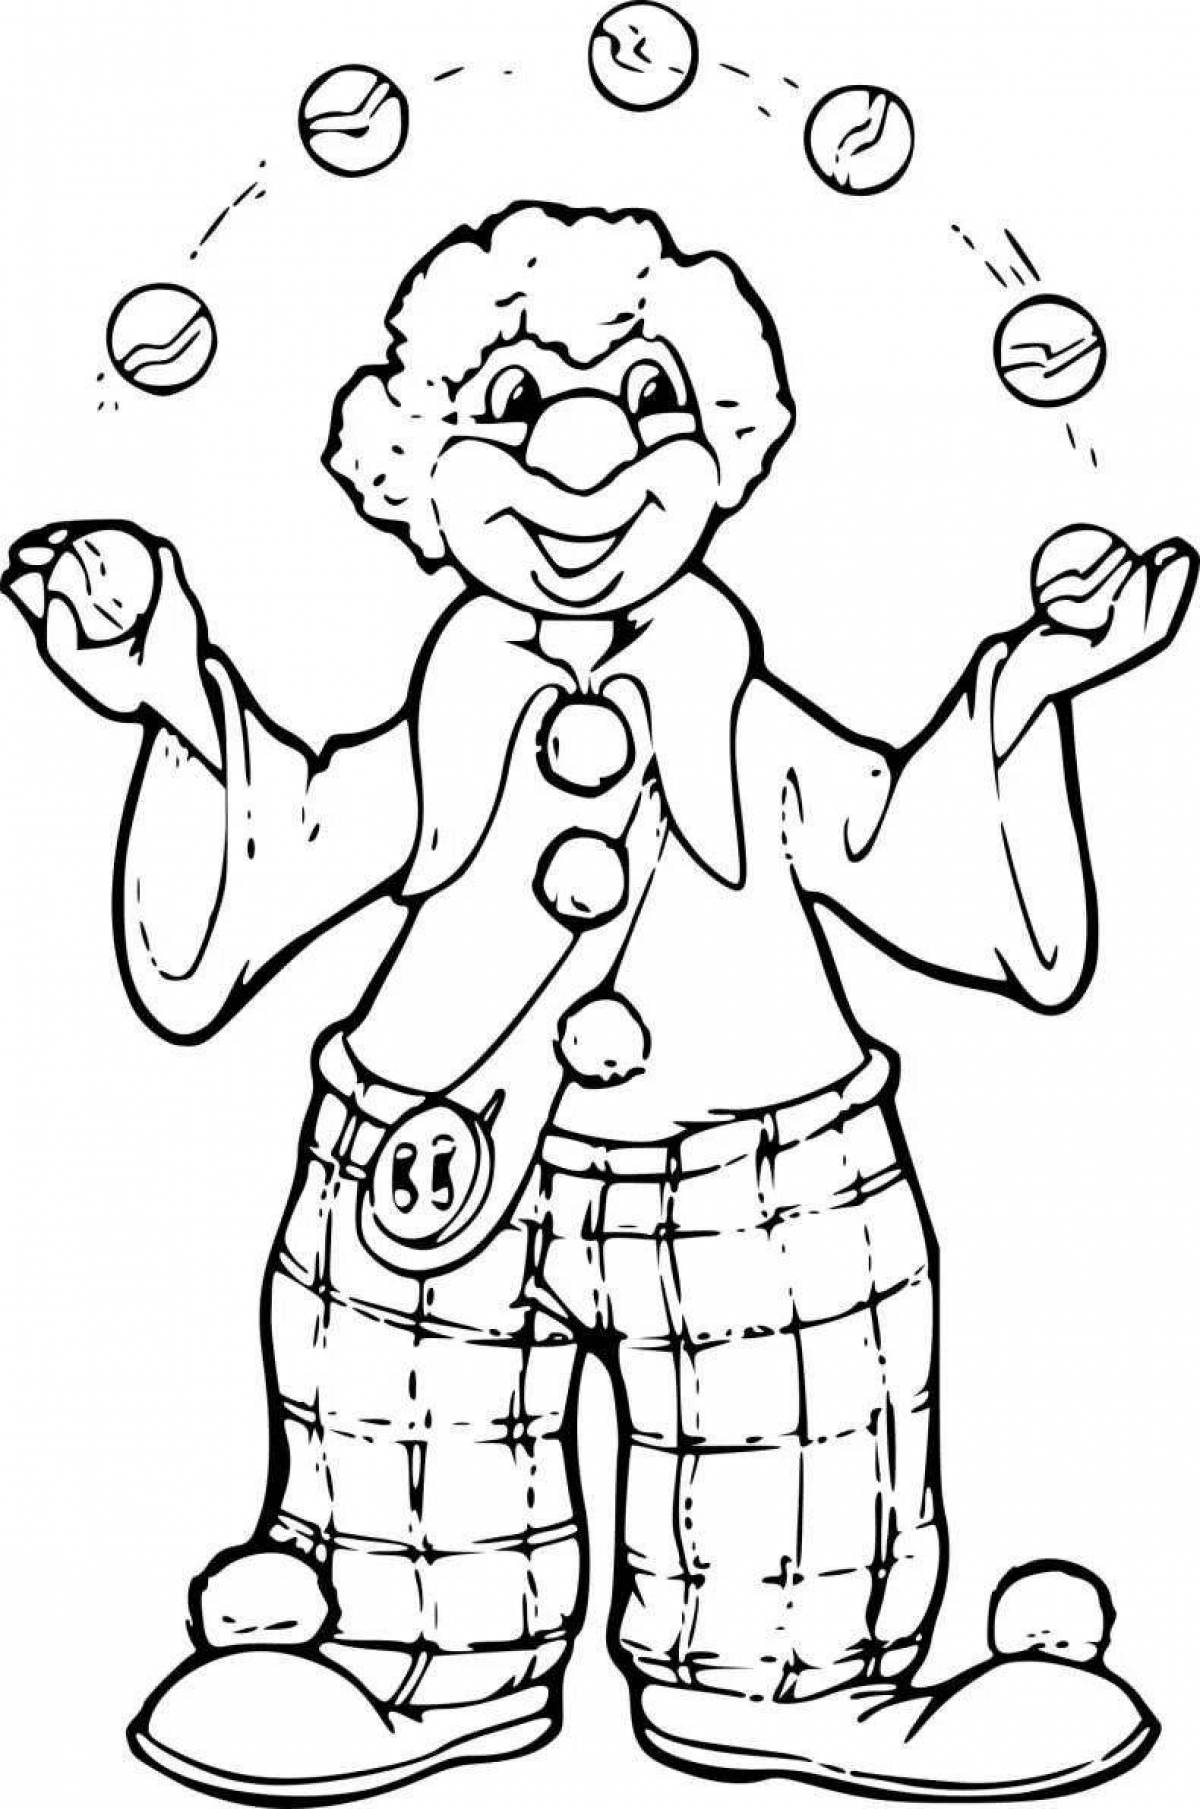 Cute coloring page visiting a clown